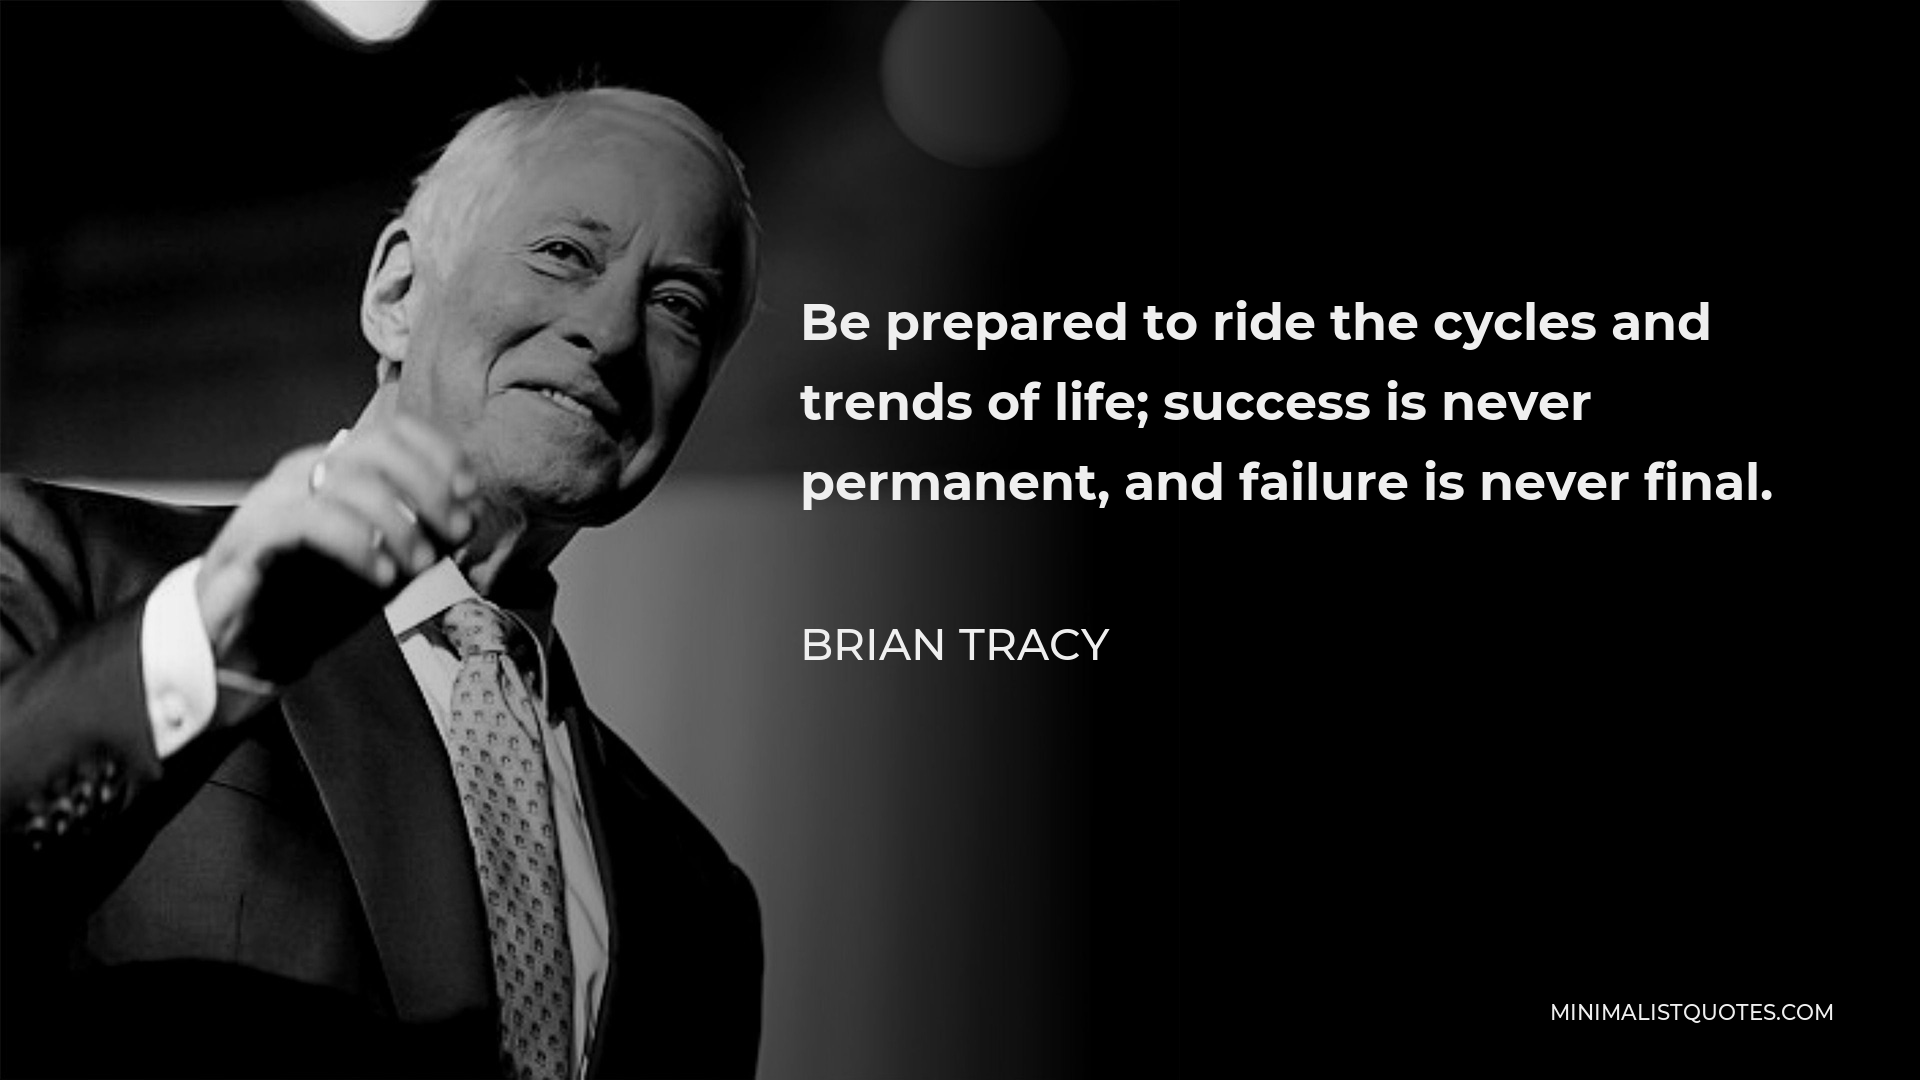 Brian Tracy Quote - Be prepared to ride the cycles and trends of life; success is never permanent, and failure is never final.